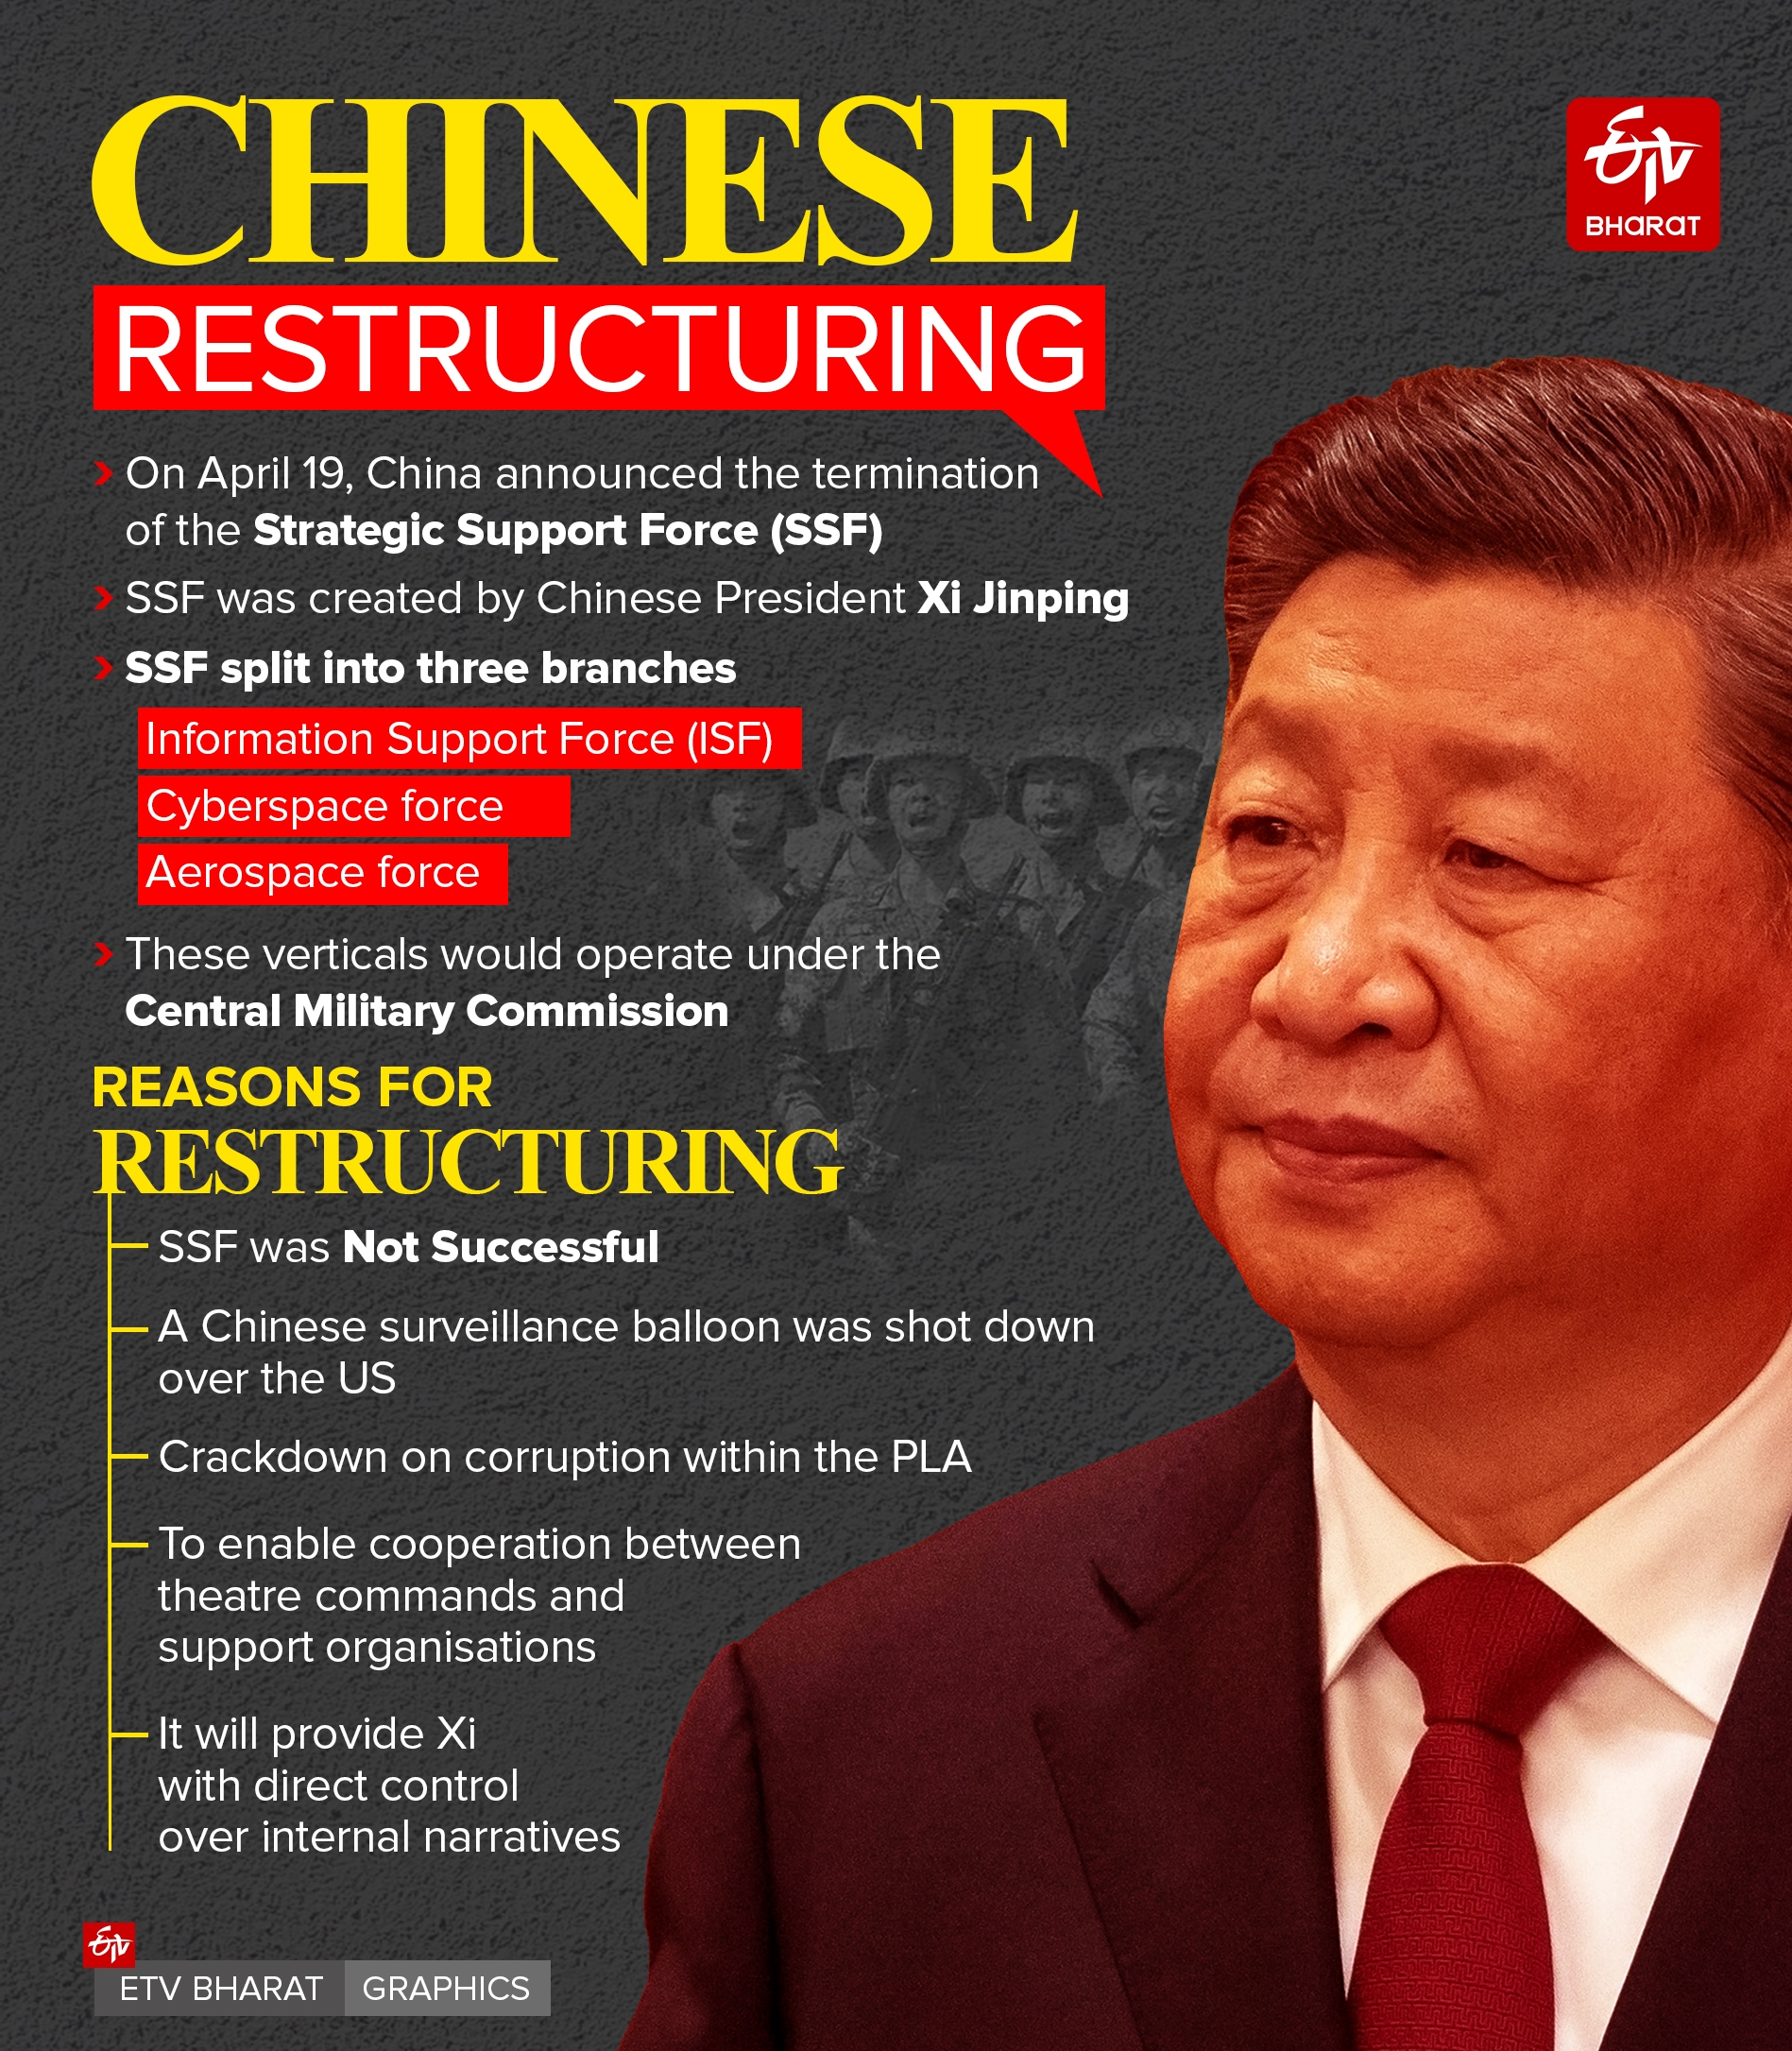 Explained - Chinese Restructuring in Defence